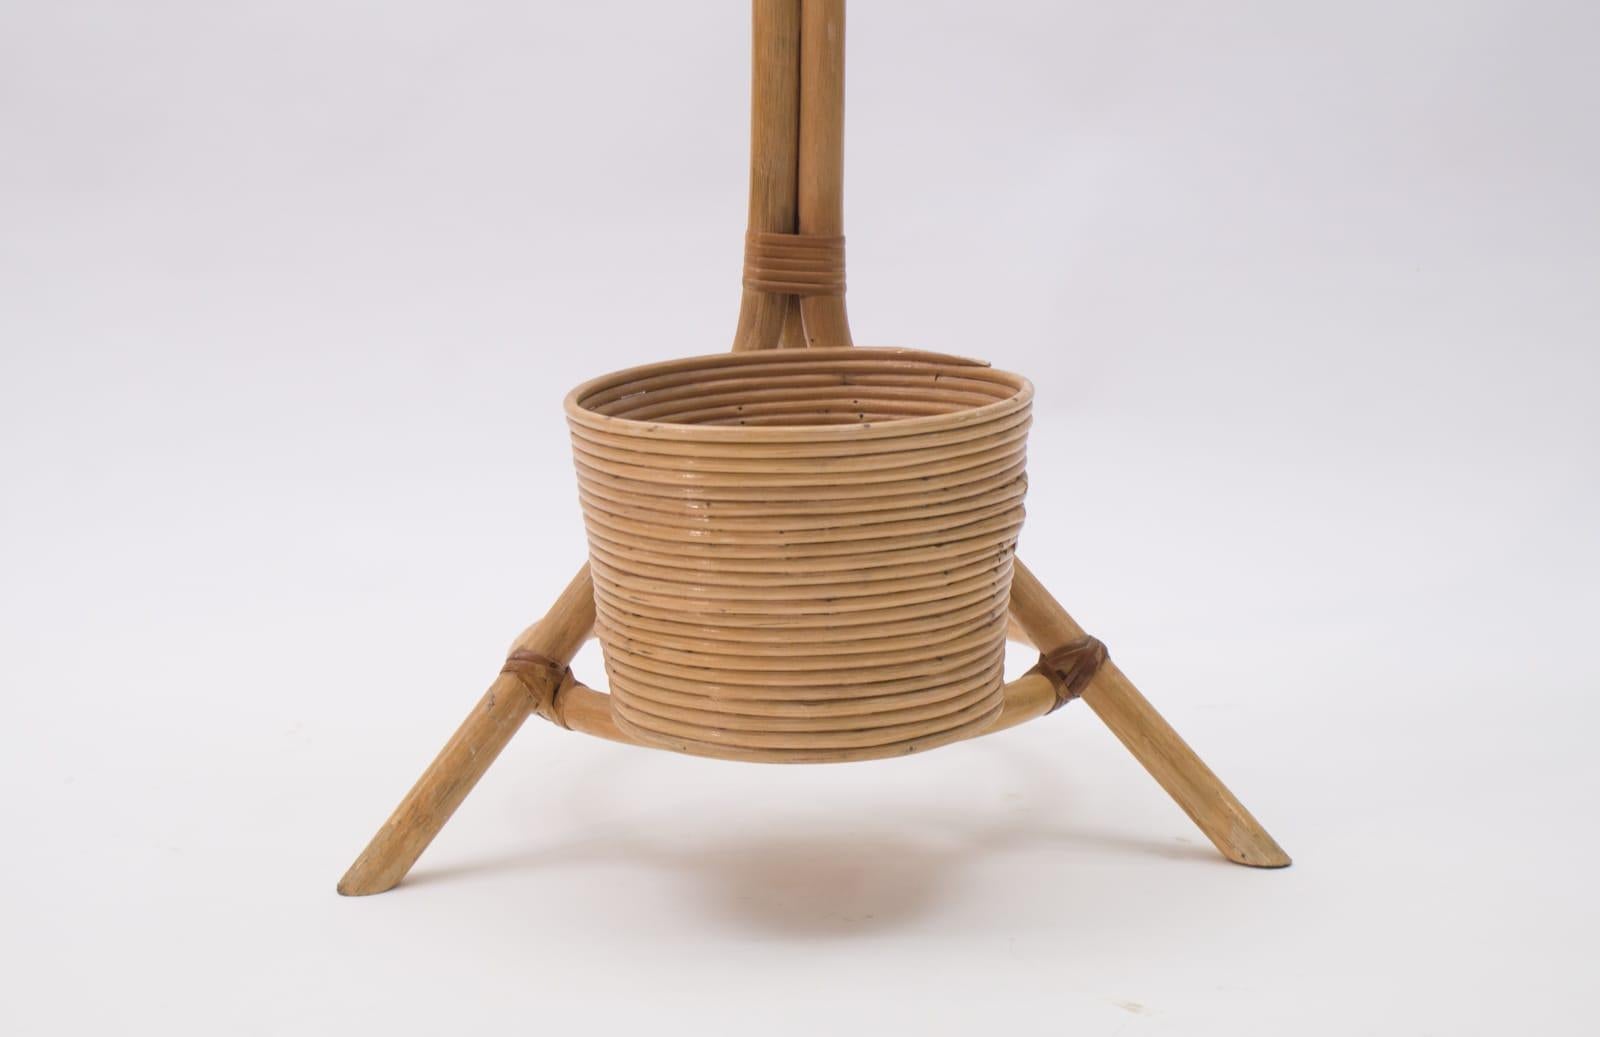 Italian Bamboo and Rattan Flower Stand or Plant Holder, 1950s For Sale 1